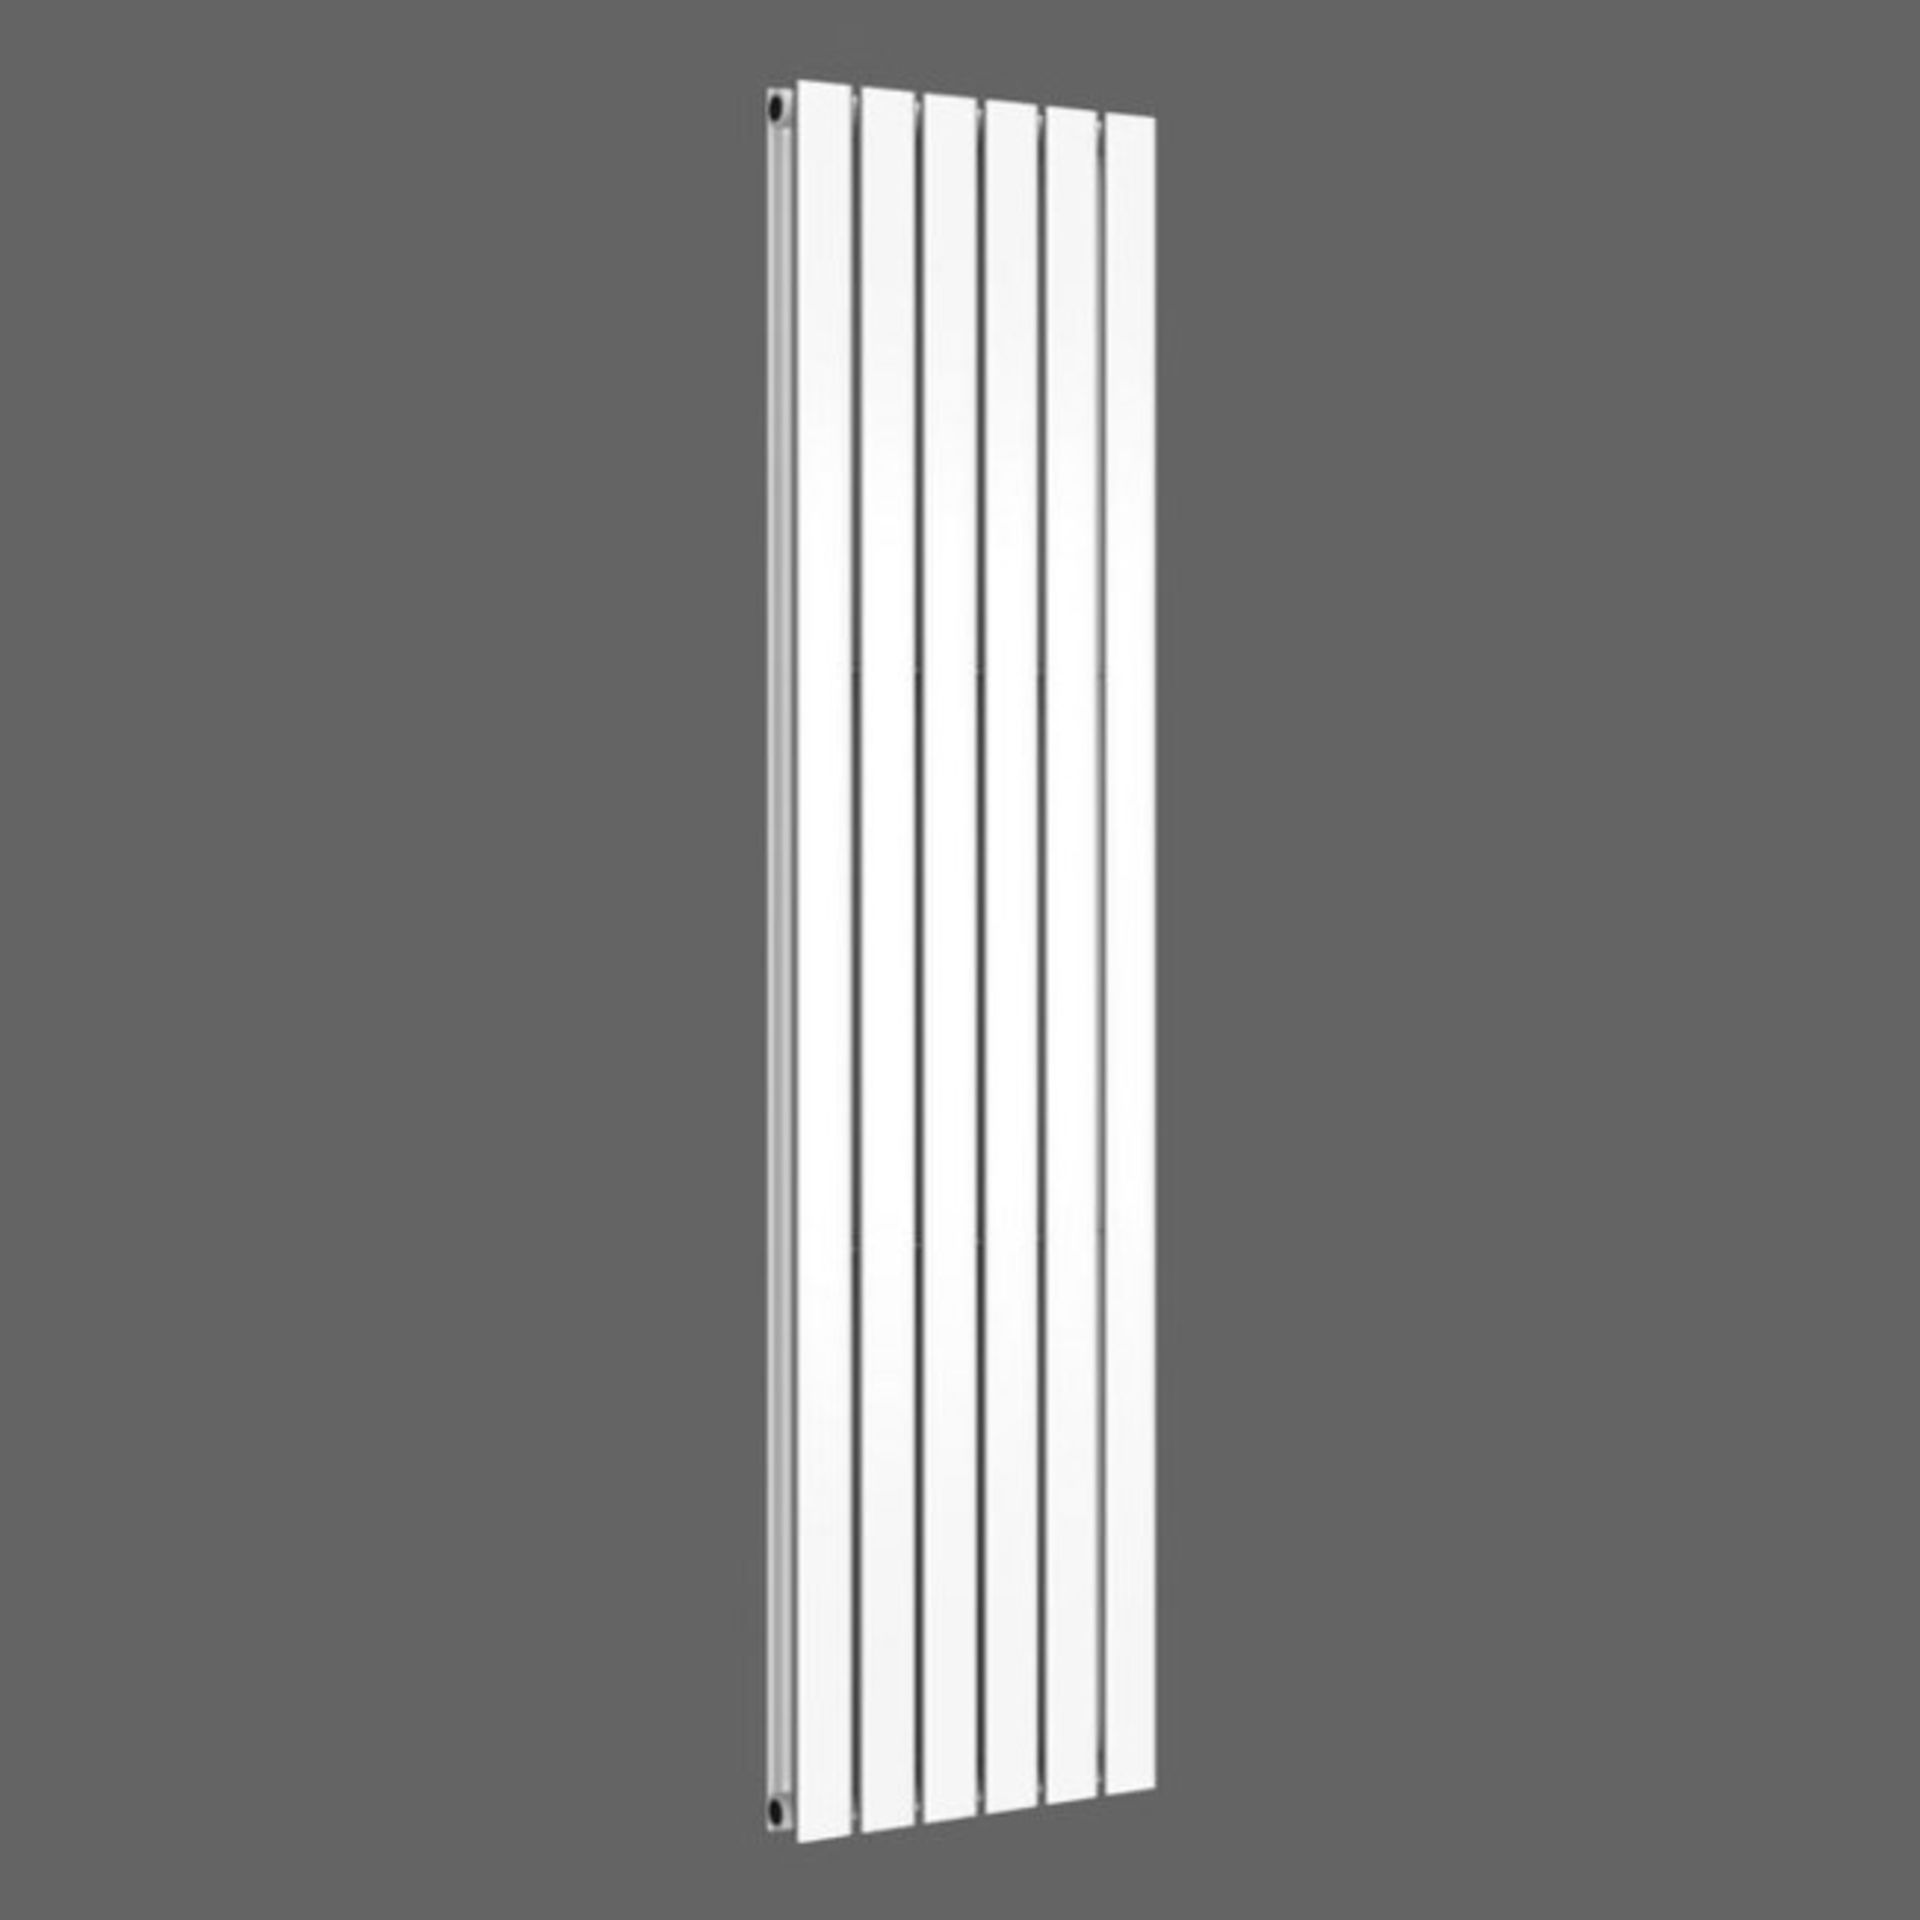 NEW & BOXED 1800x360mm Gloss White Single Flat Panel Vertical Radiator. RRP £309.99.We love th... - Image 2 of 2